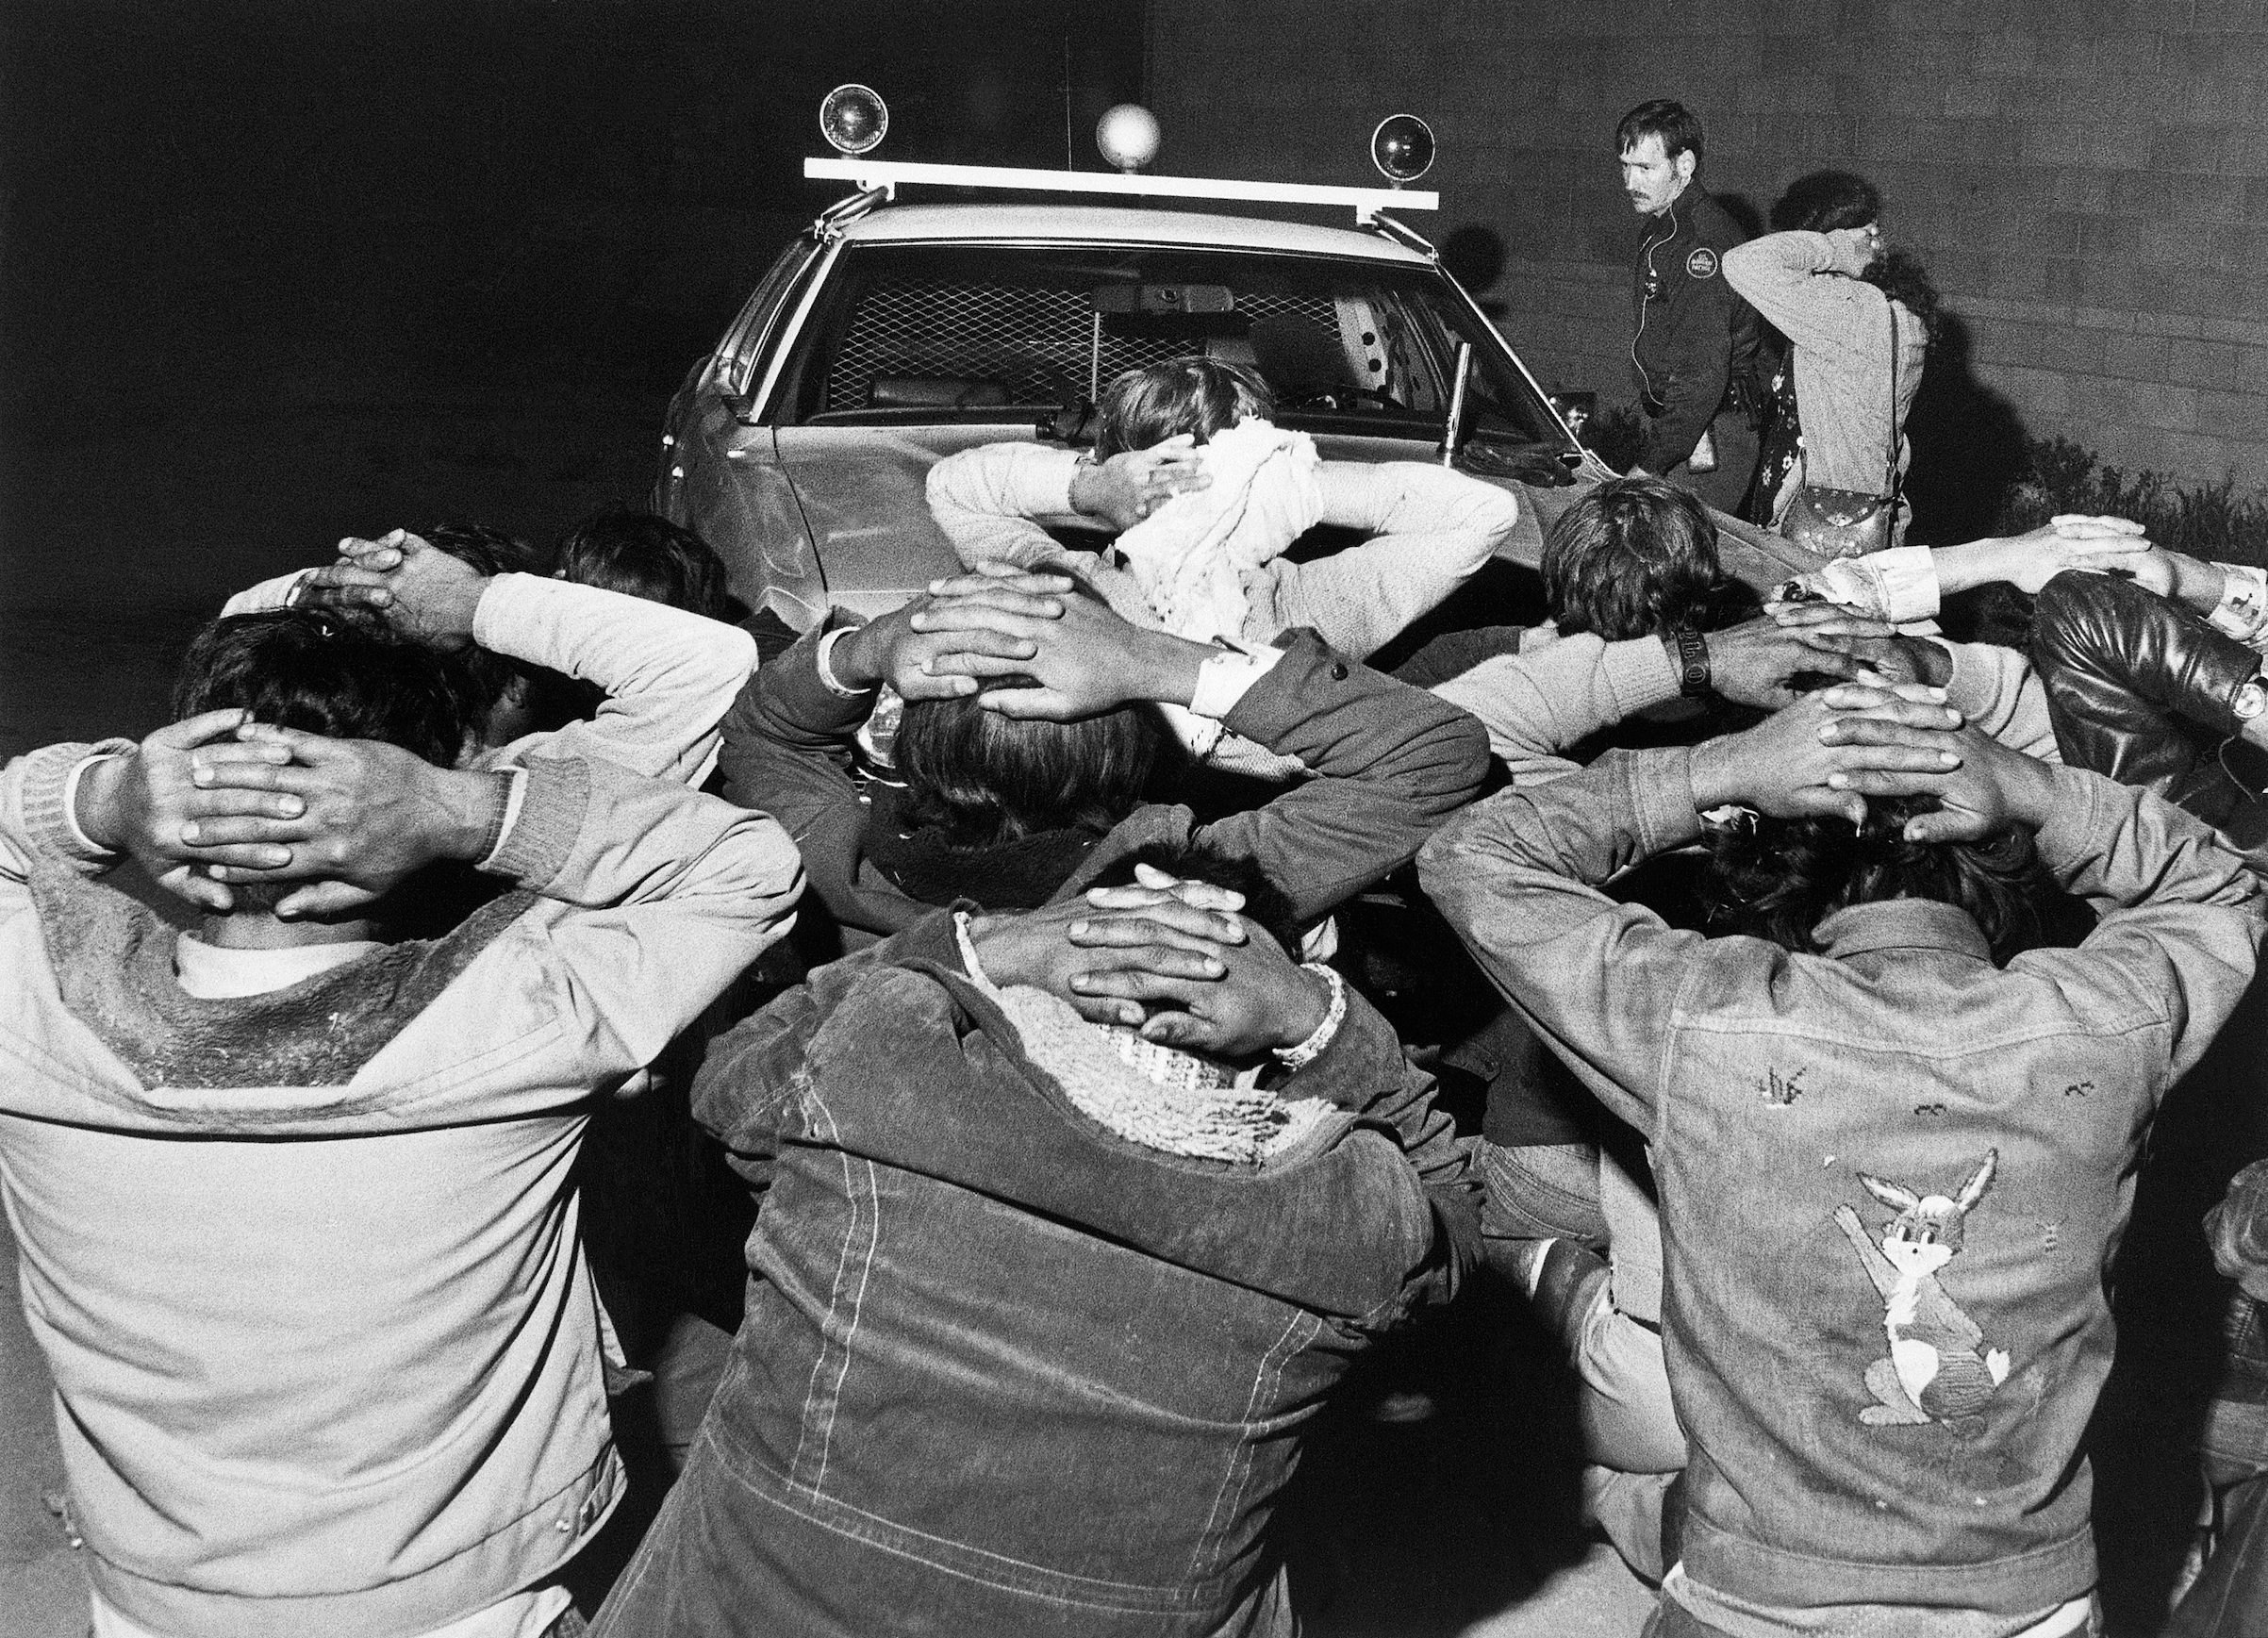 Men who have been caught trying to cross the border from Mexico to the United States, in Tijuana, Mexico, on May 11, 1977. (Bettmann Archive)